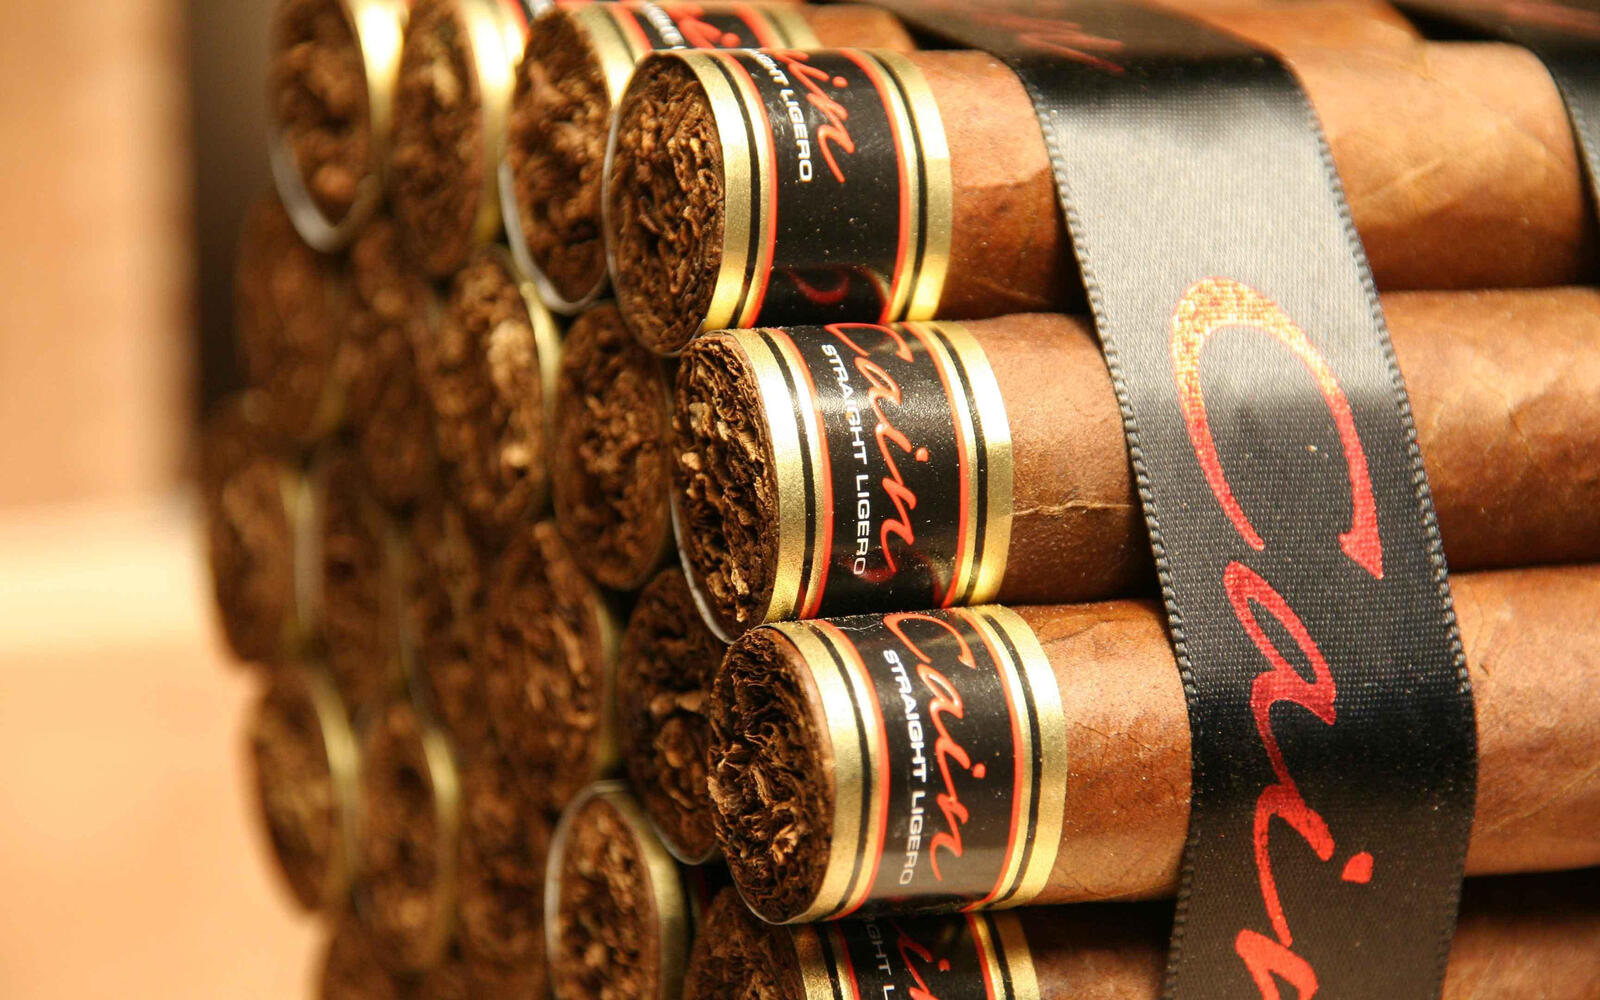 Wallpapers cigars cain tobacco on the desktop